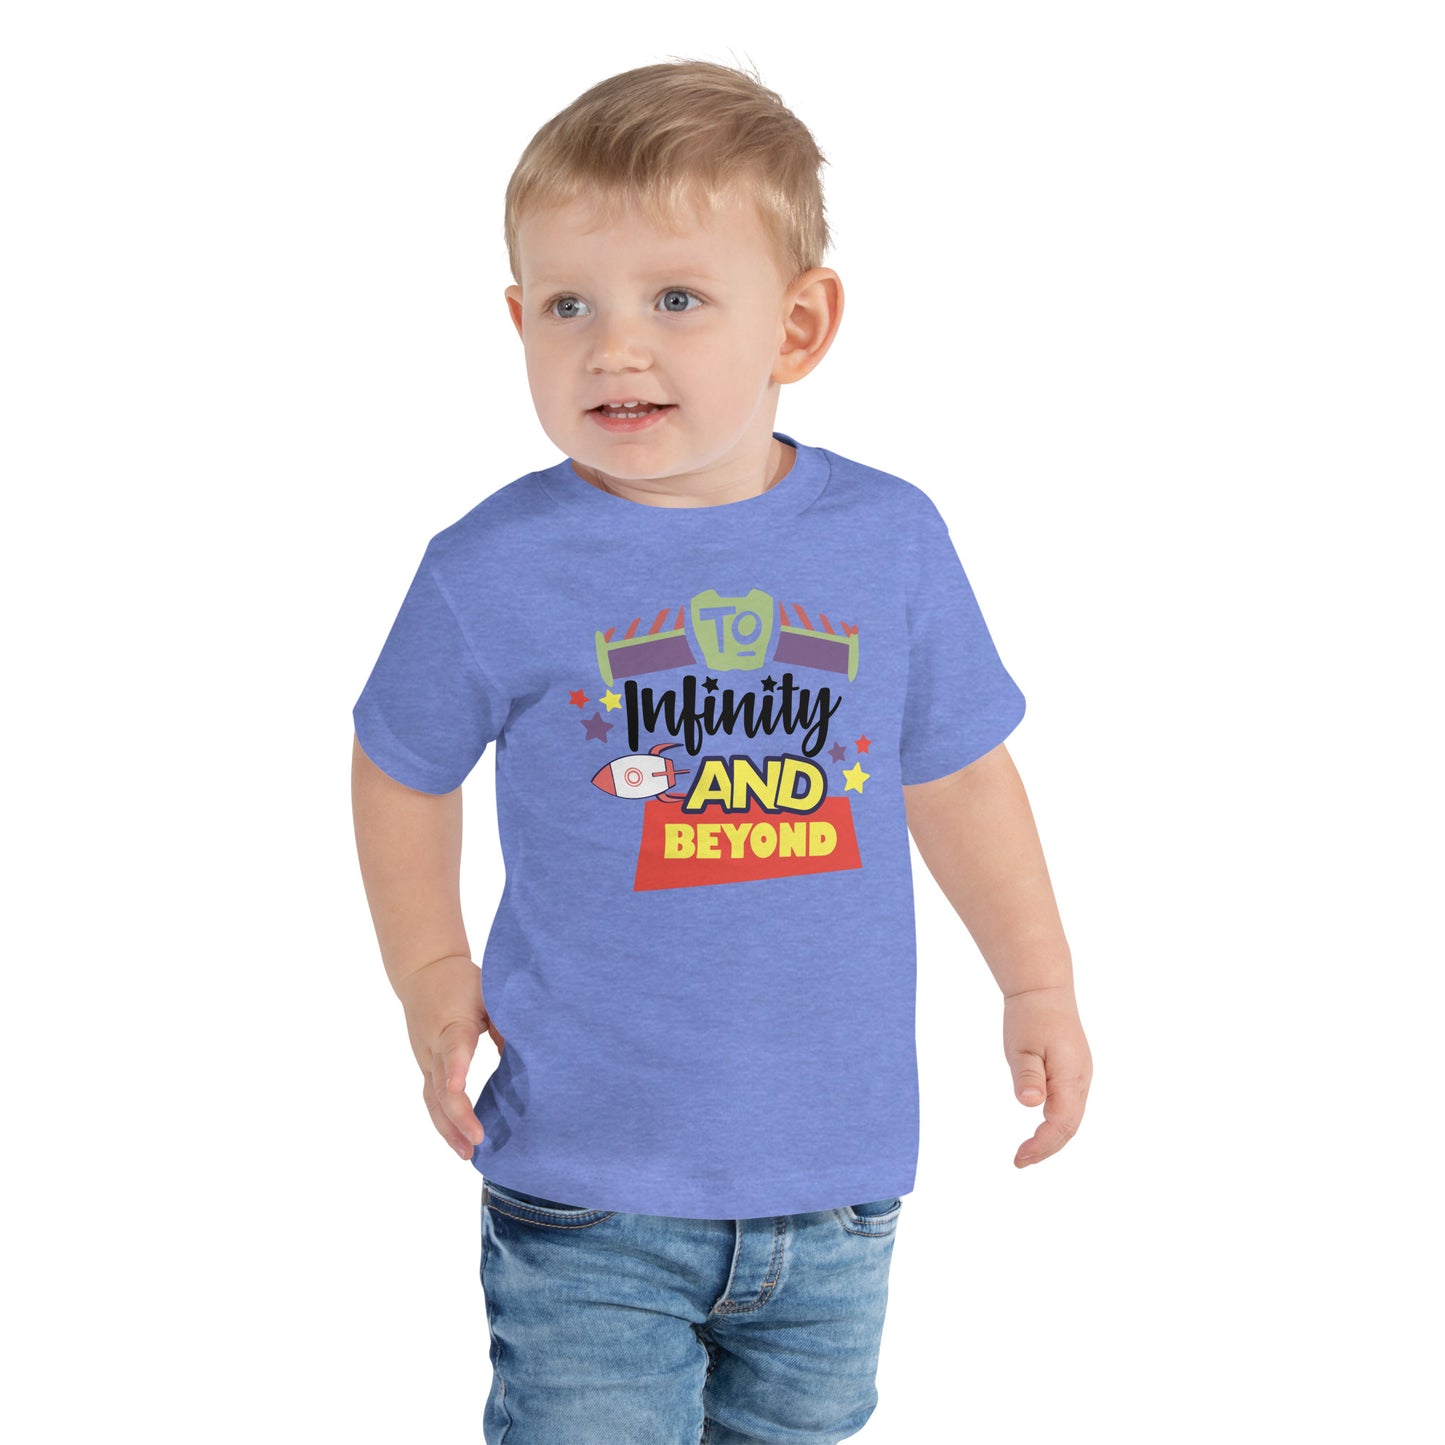 TO INFINITY AND BEYOND / Toddler Short Sleeve Tee